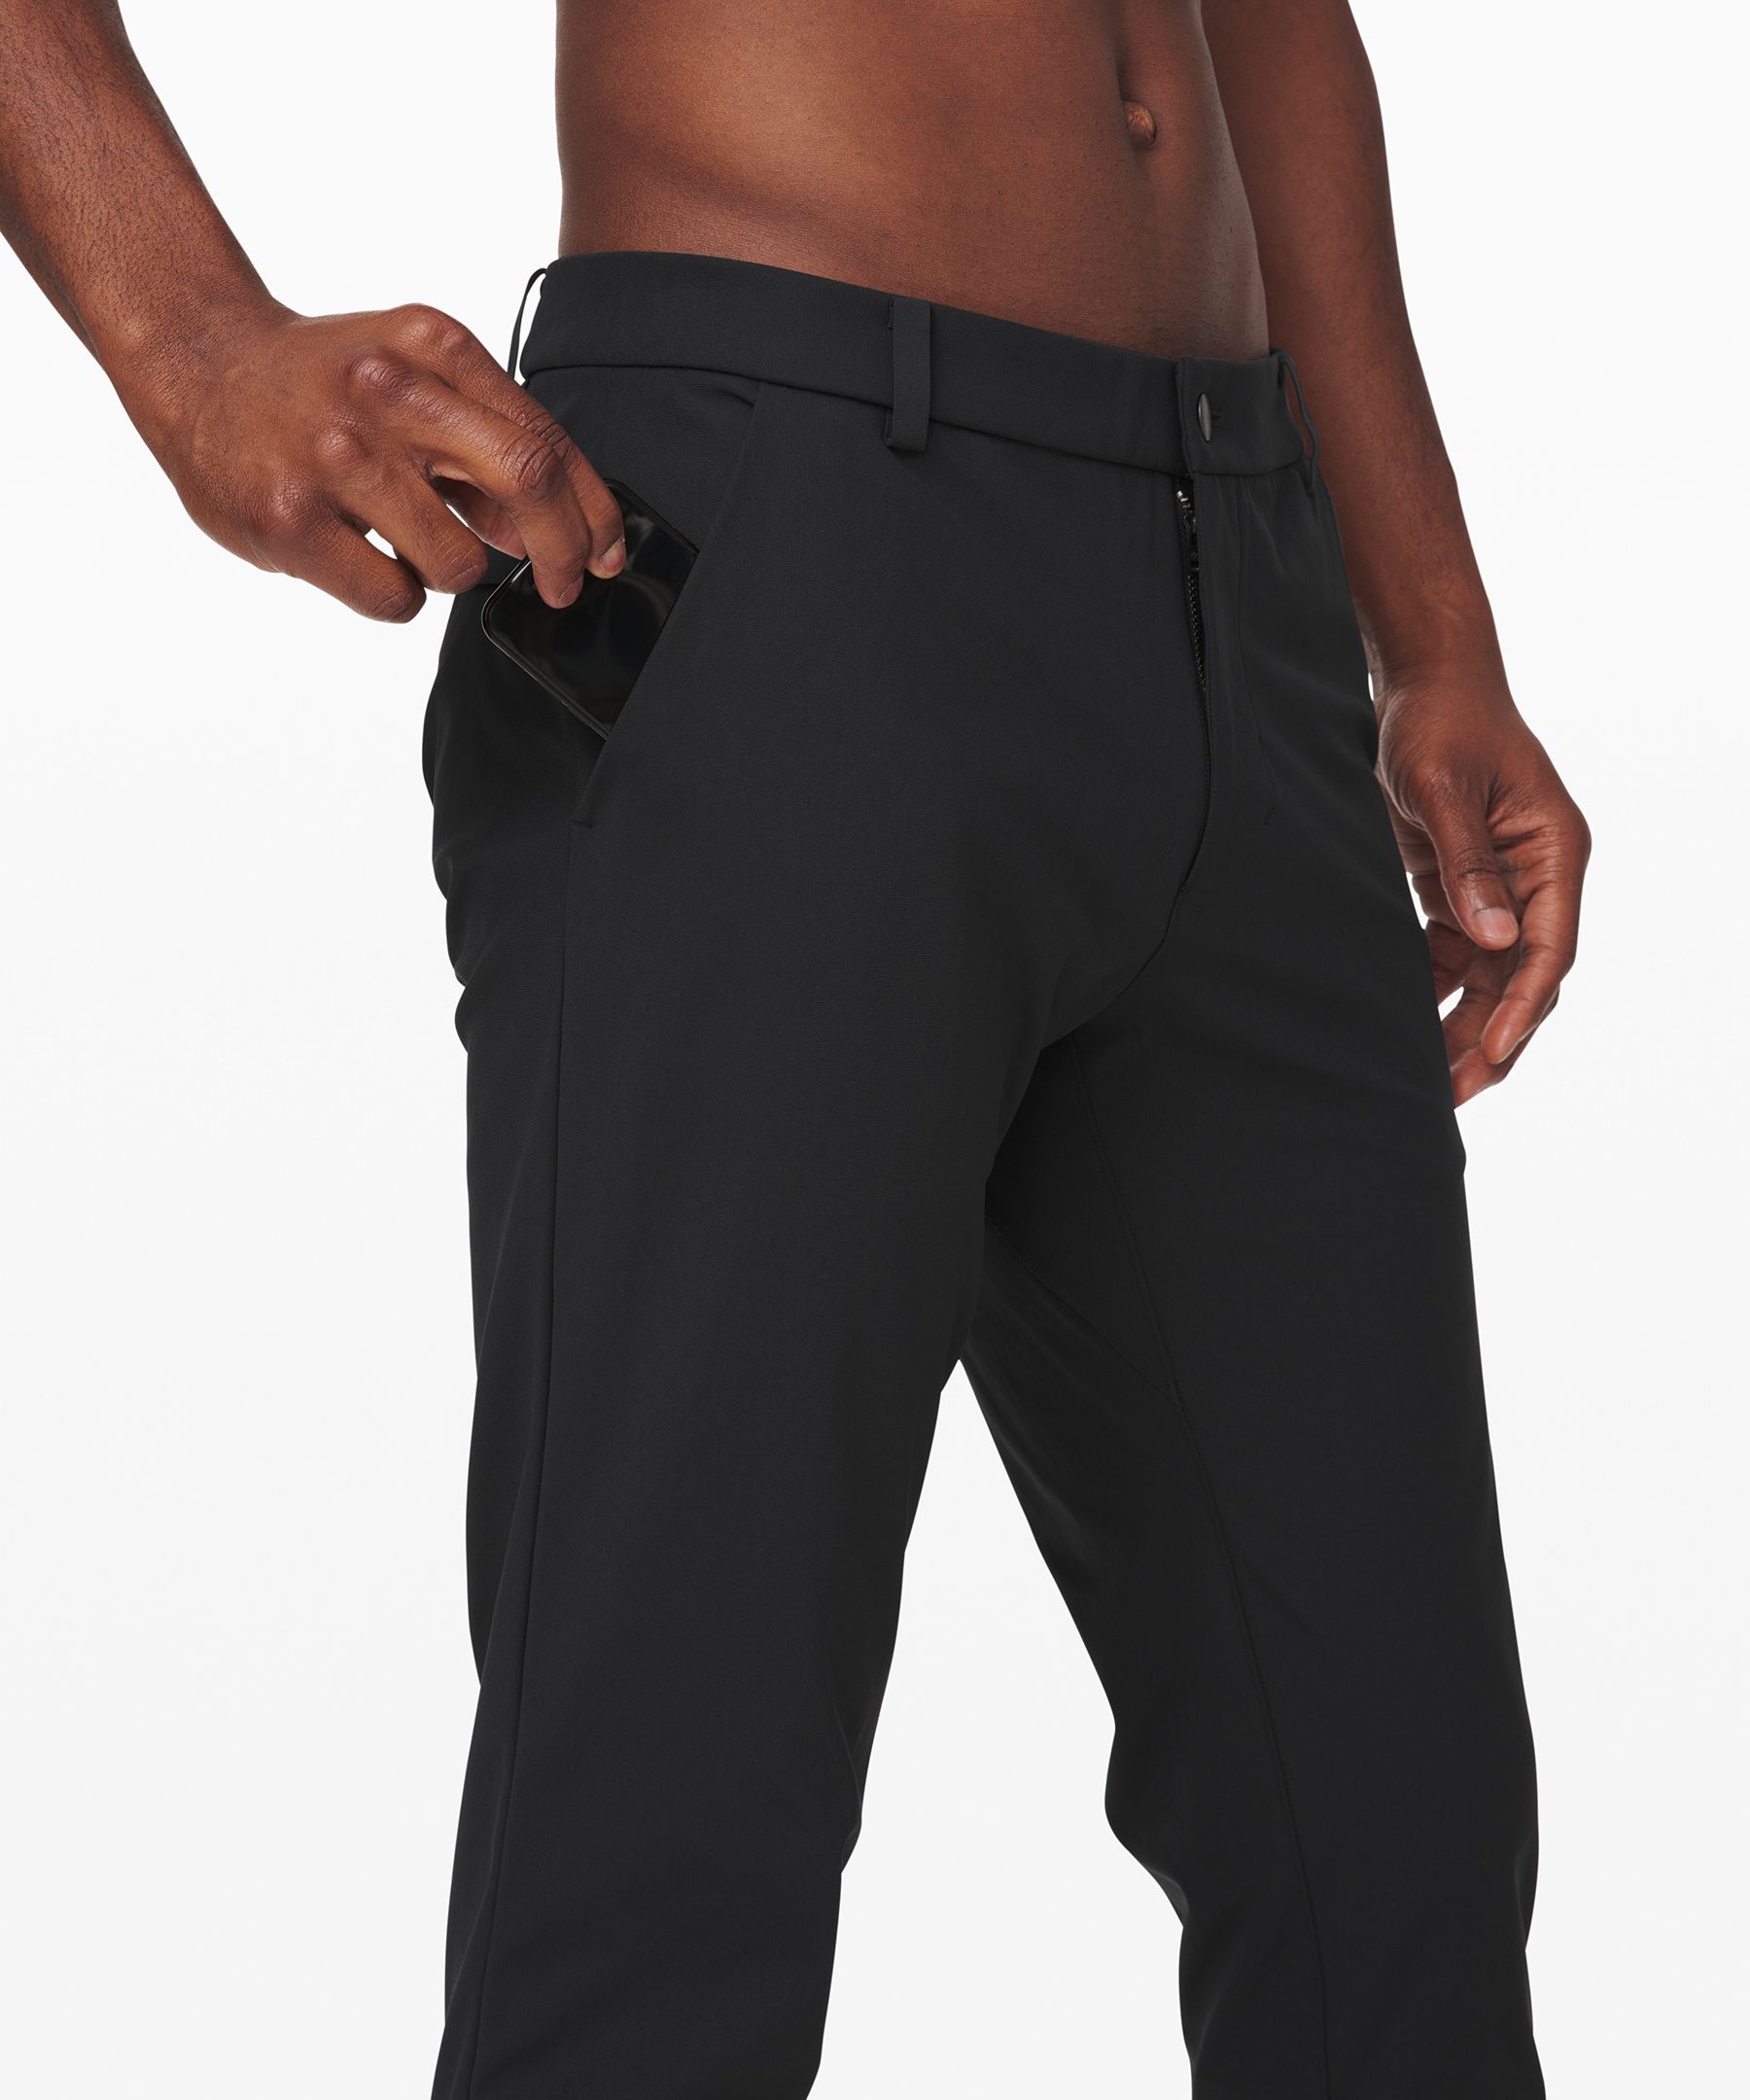 Lululemon Commission Pant Business Casualty  International Society of  Precision Agriculture